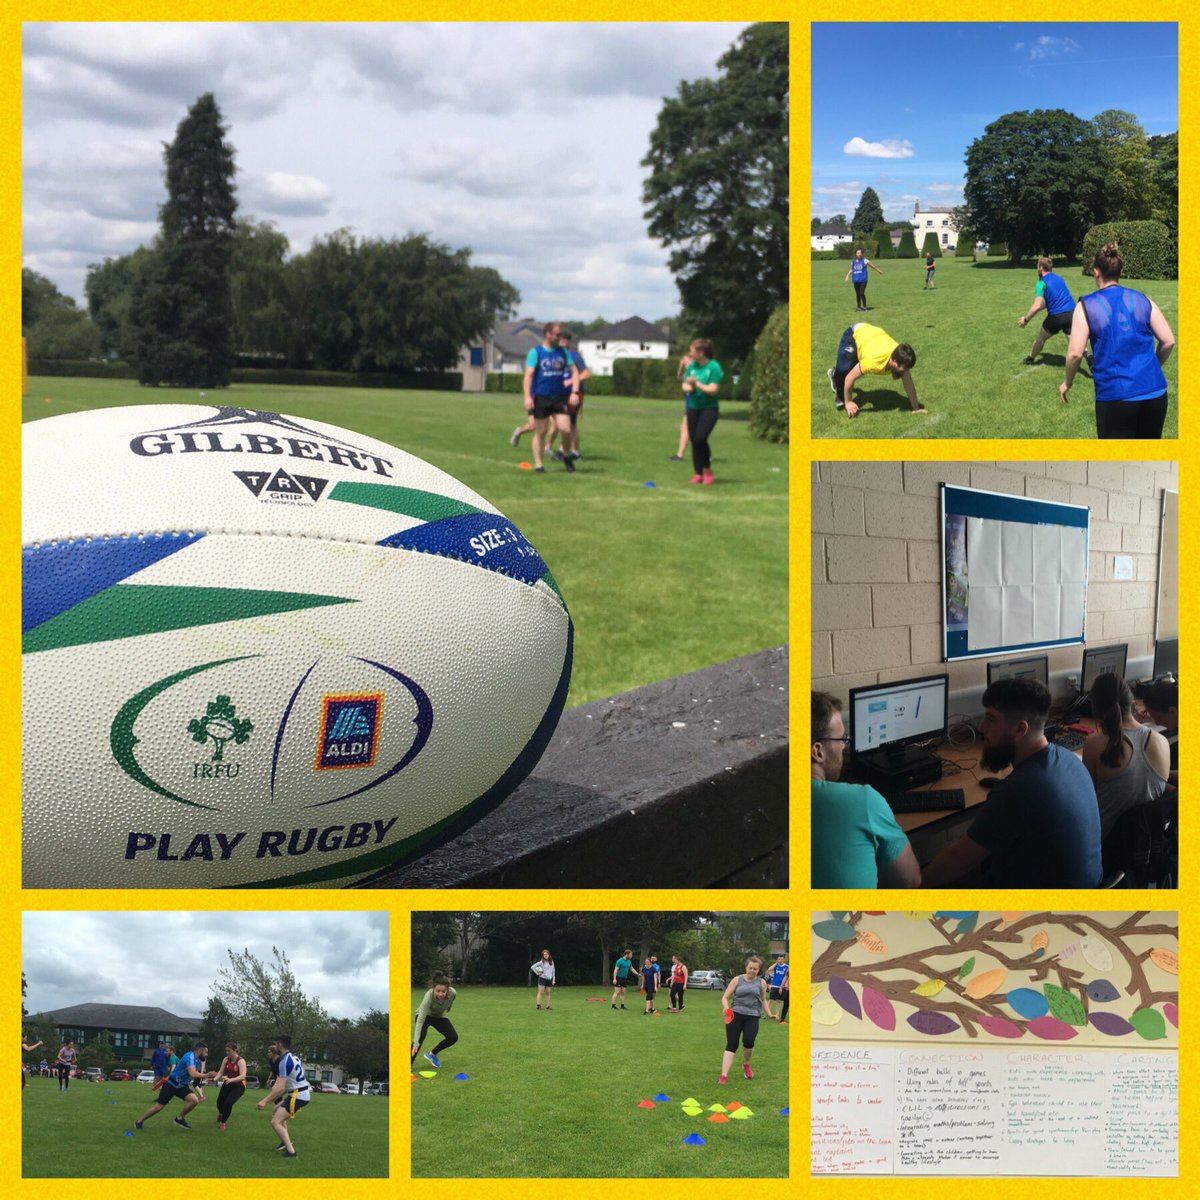 Tremendous week on the @Aldi_Ireland Primary Teacher Training Course, on Teaching FMS in PE through Tag Rugby. Brilliant interaction and idea shared from the teachers on the course. Massive thanks to @Kings_Hospital for hosting us!!#FromTheGroundUp #AldiPlayRugby #Rugby4All